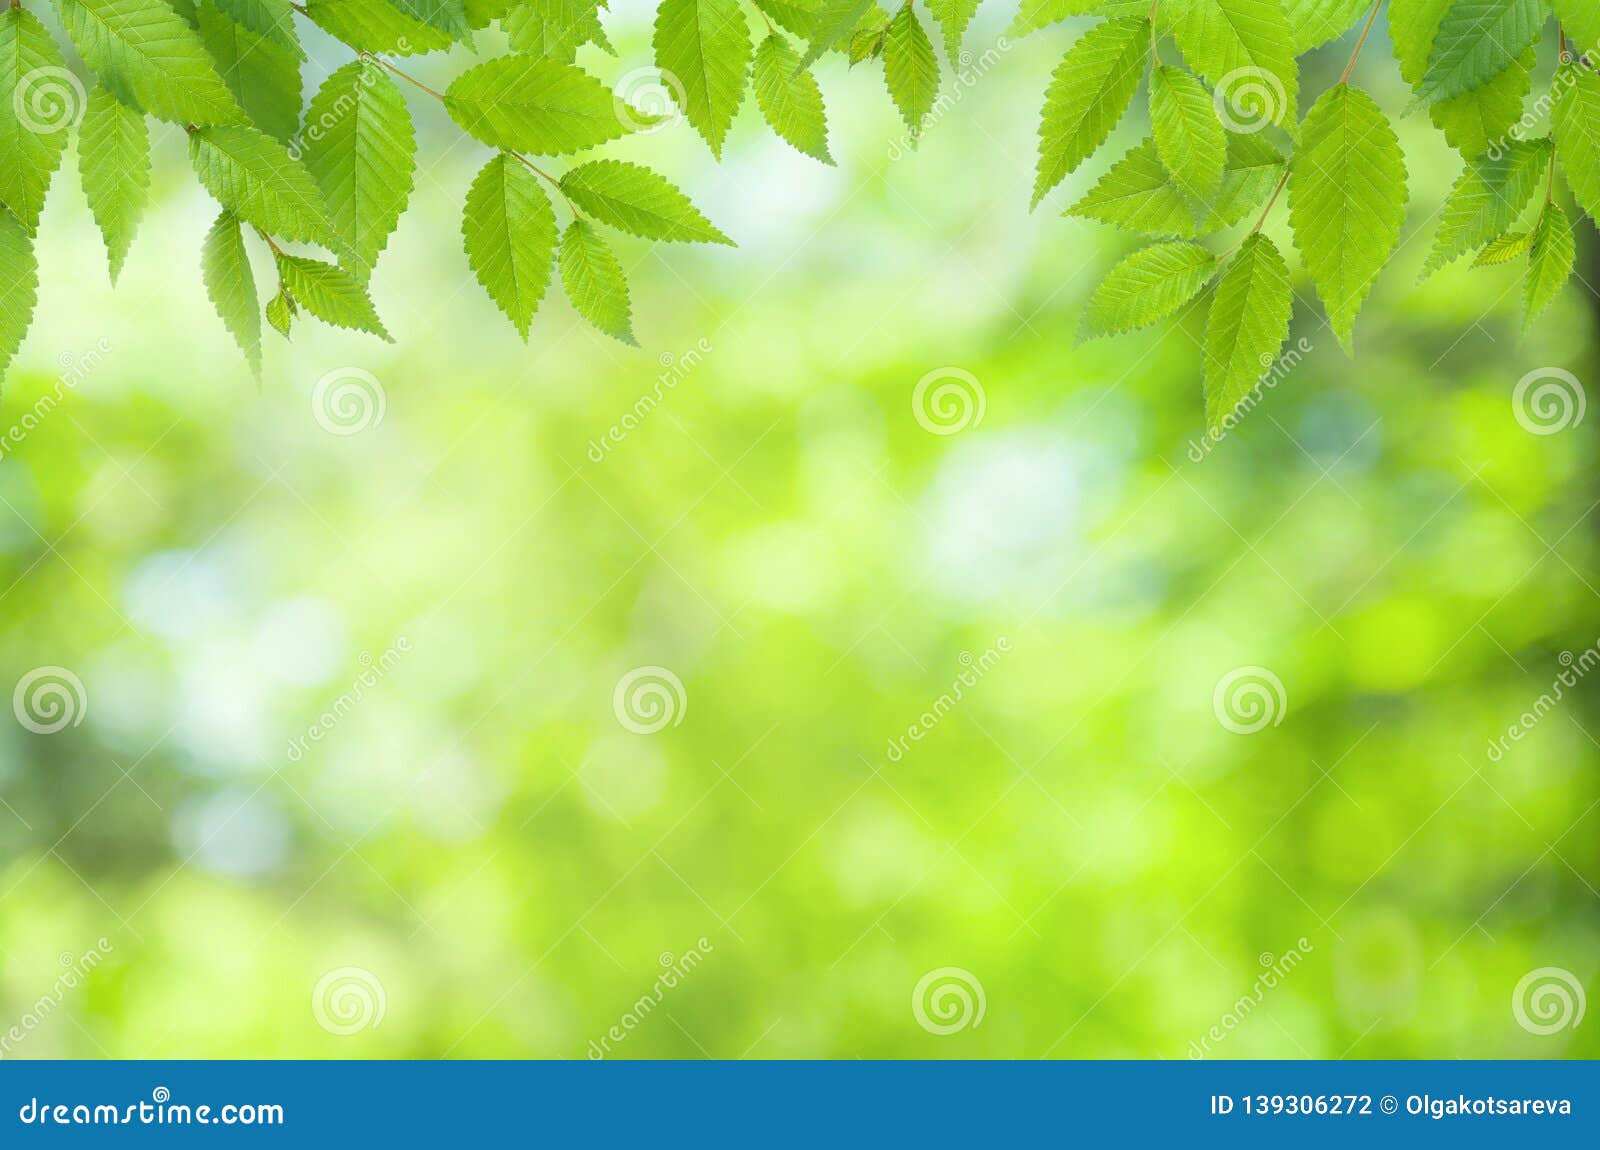 Spring Natural Blurred Background with Green Leaves on Tree Branch, Copy  Space, Defocused Stock Photo - Image of summer, frame: 139306272